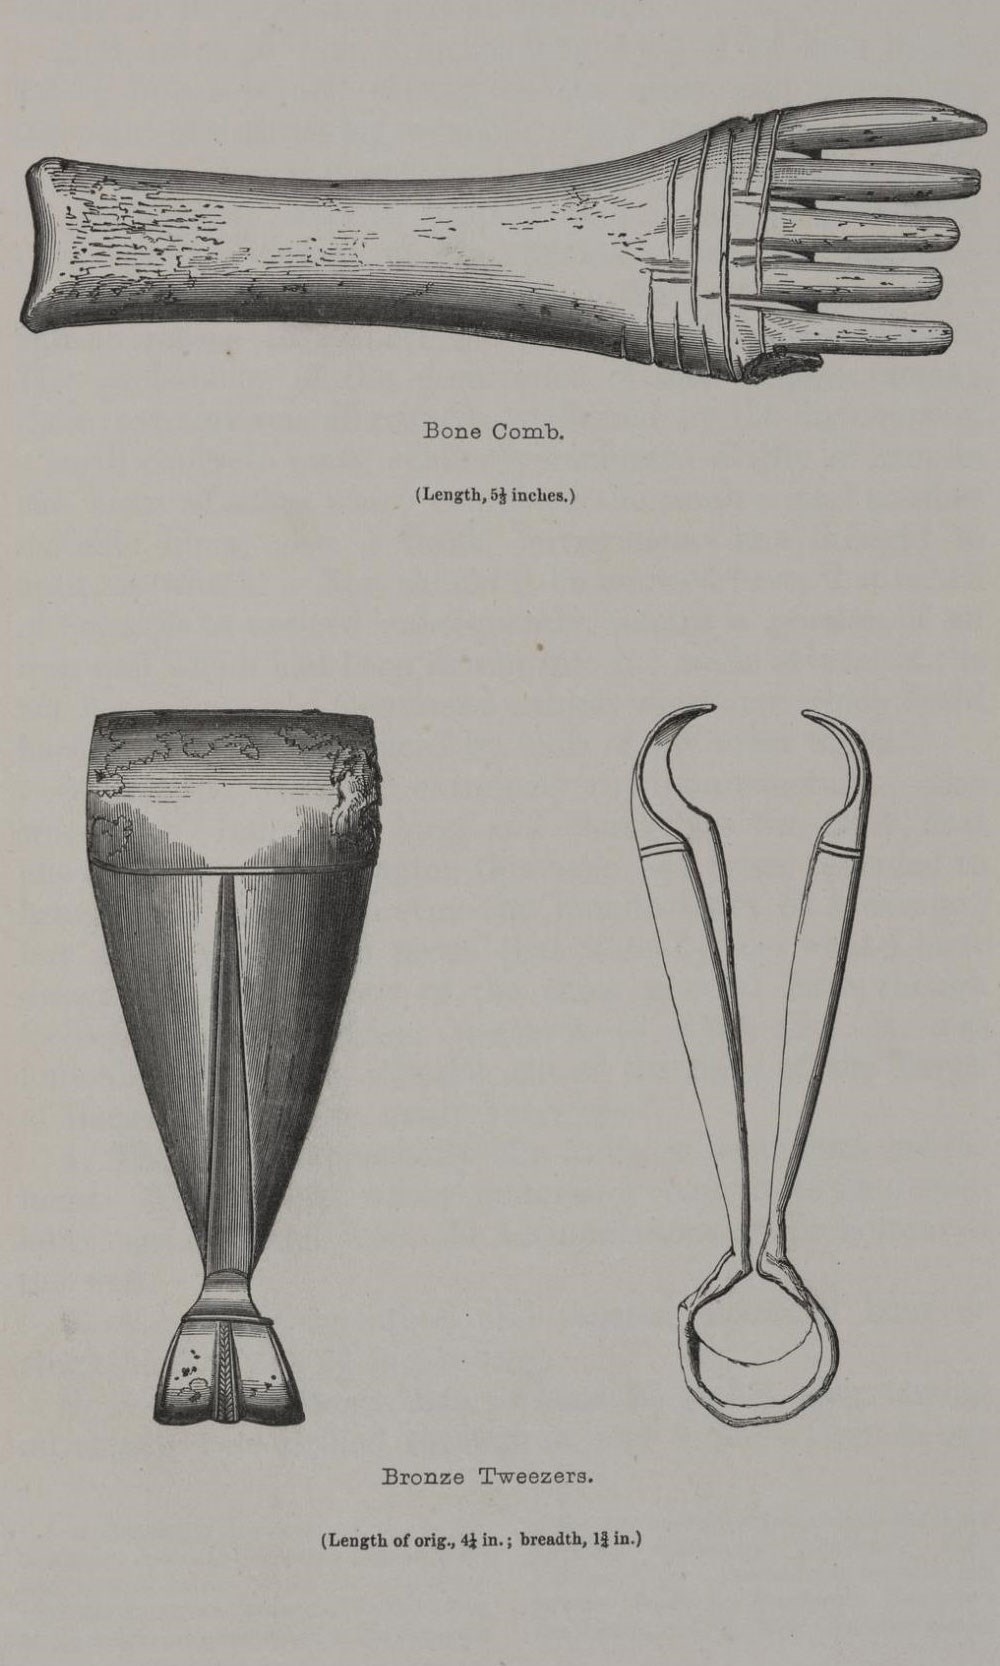 Illustration of a whale-bone weaving comb (X.GI 36) and bronze tweezers (X.GI 75) from Alexander Henry Rhind’s ‘Notice of the Exploration of a ‘Picts’ House, at Kettleburn, in the County of Caithness’ (1853).